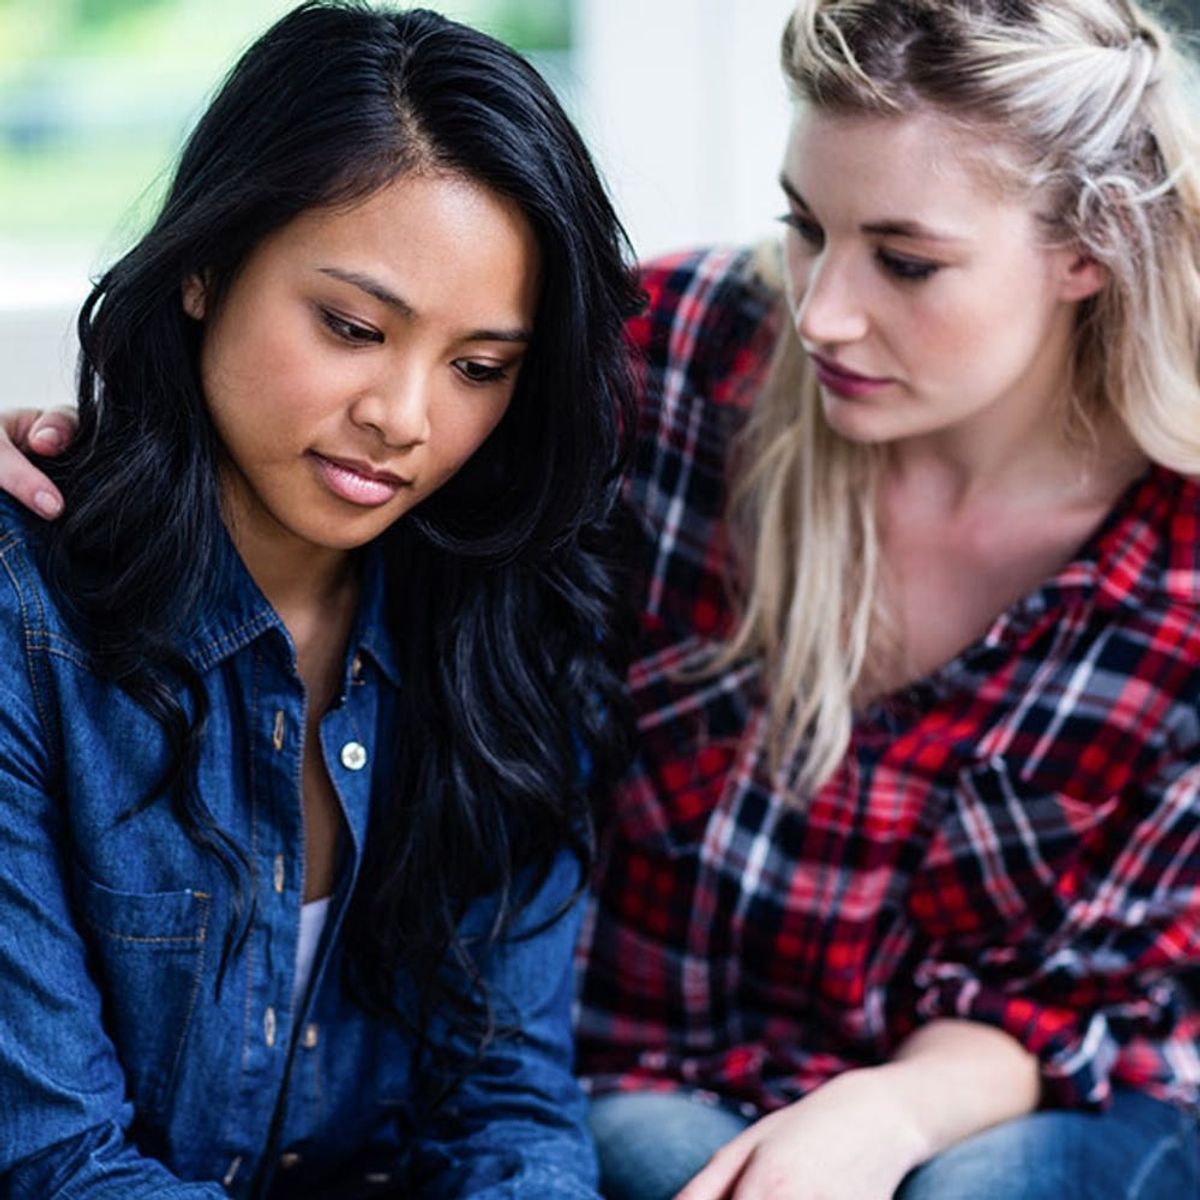 8 Signs That Your Strongest Friend Needs Extra Support